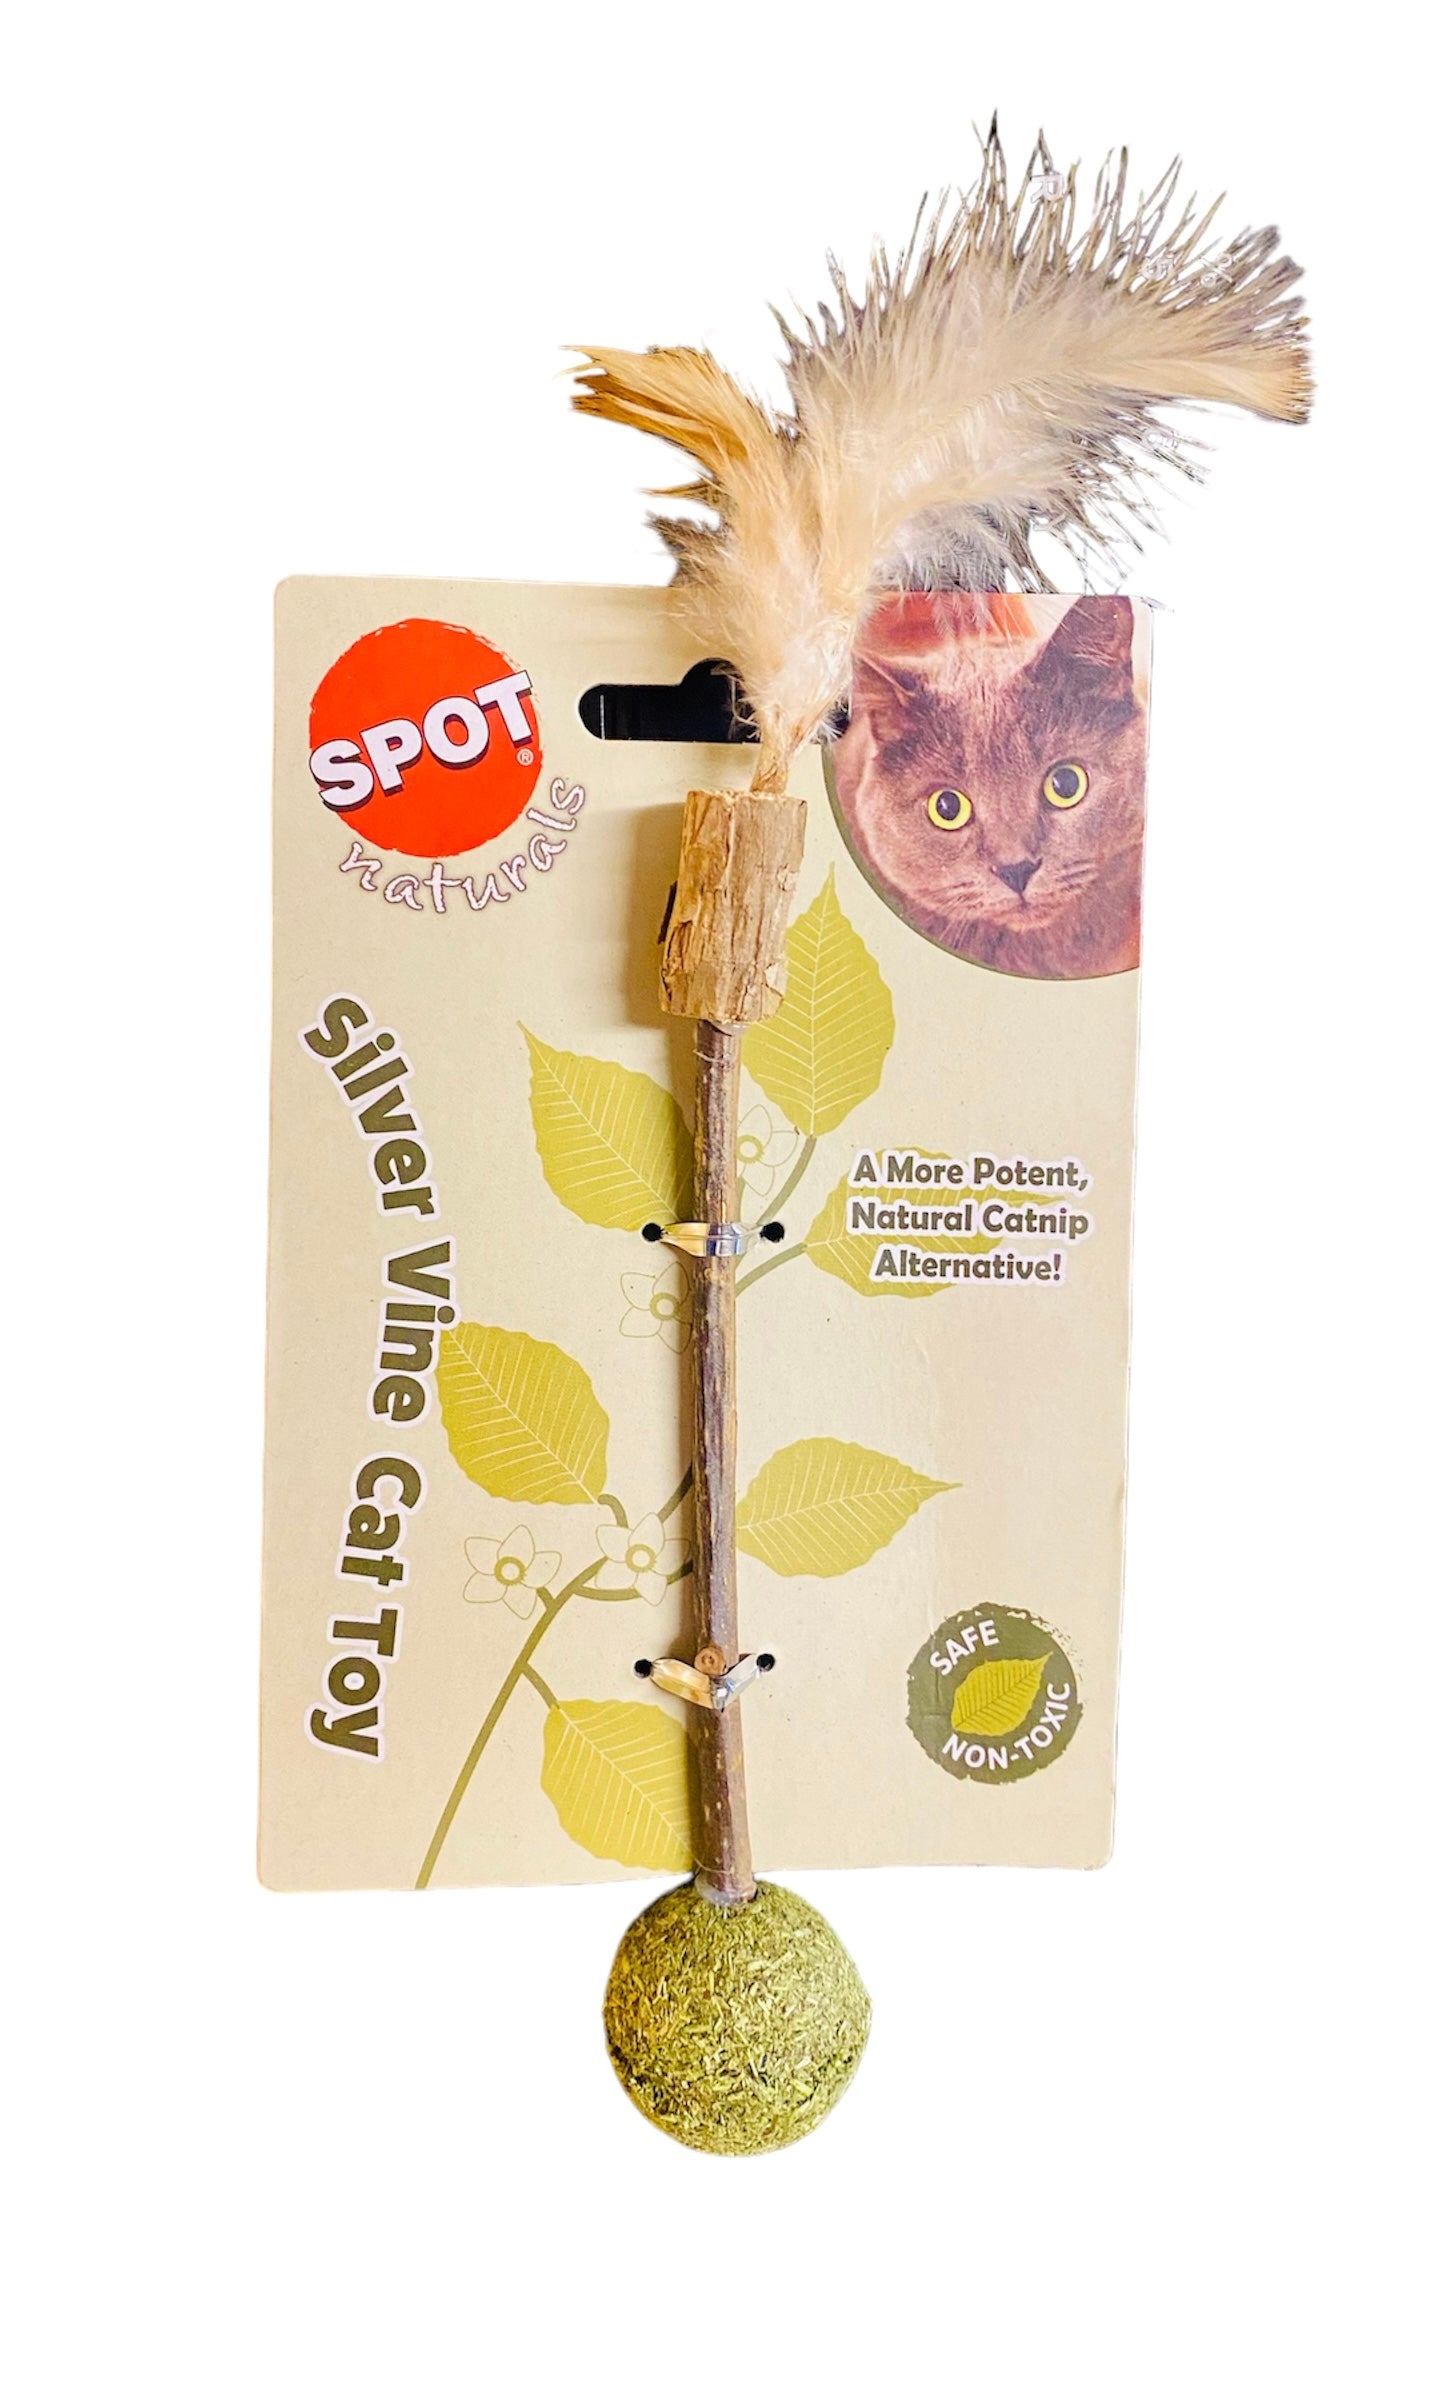 Ethical/Spot Silver Vine and Feathers Cat Toy